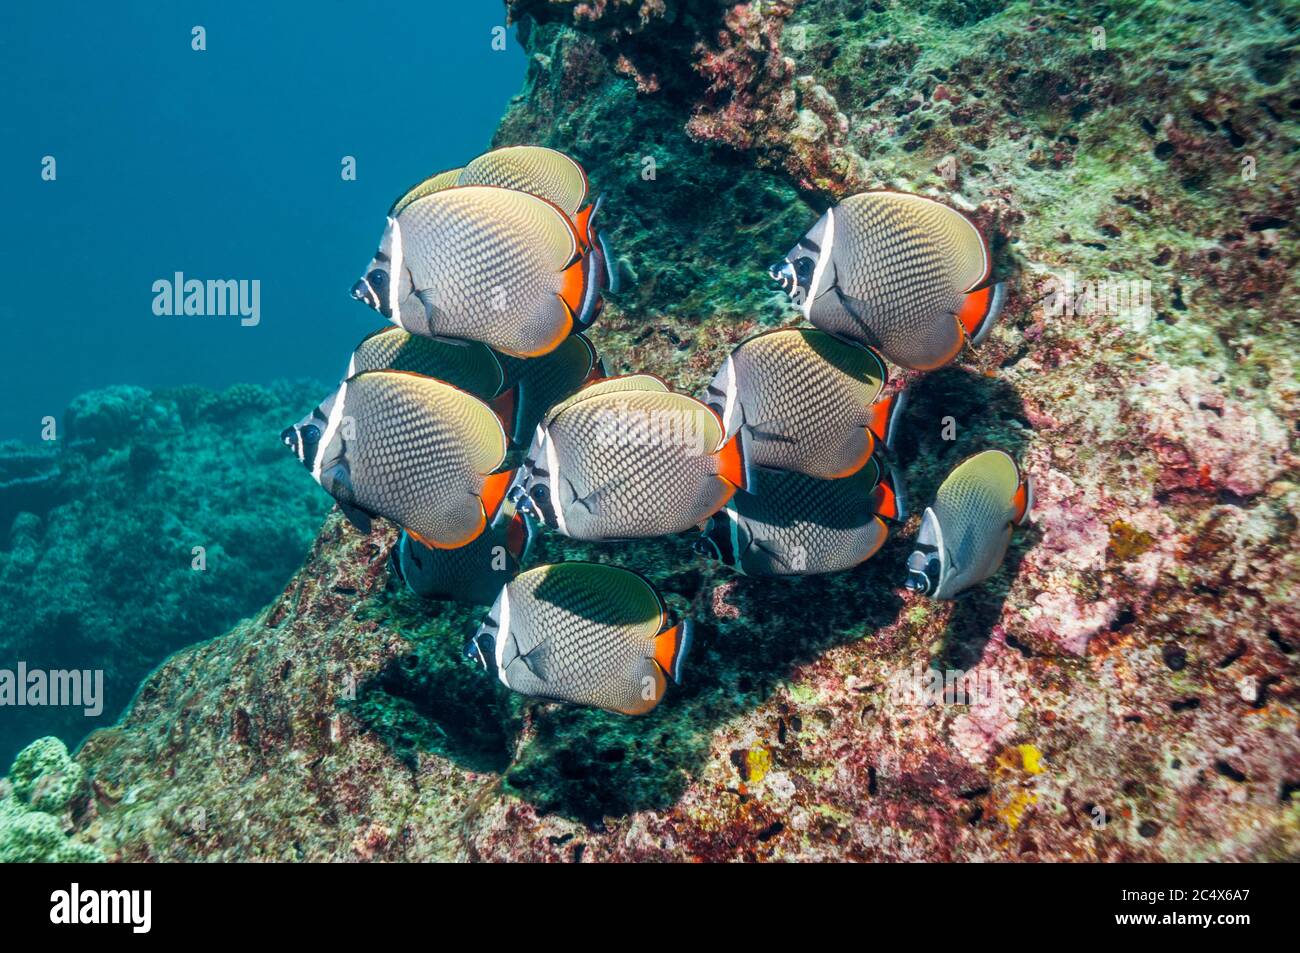 Redtail or Collared butterflyfish [Chaetodon collare].  Andaman Sea, Thailand.  Indo-Pacific. Stock Photo